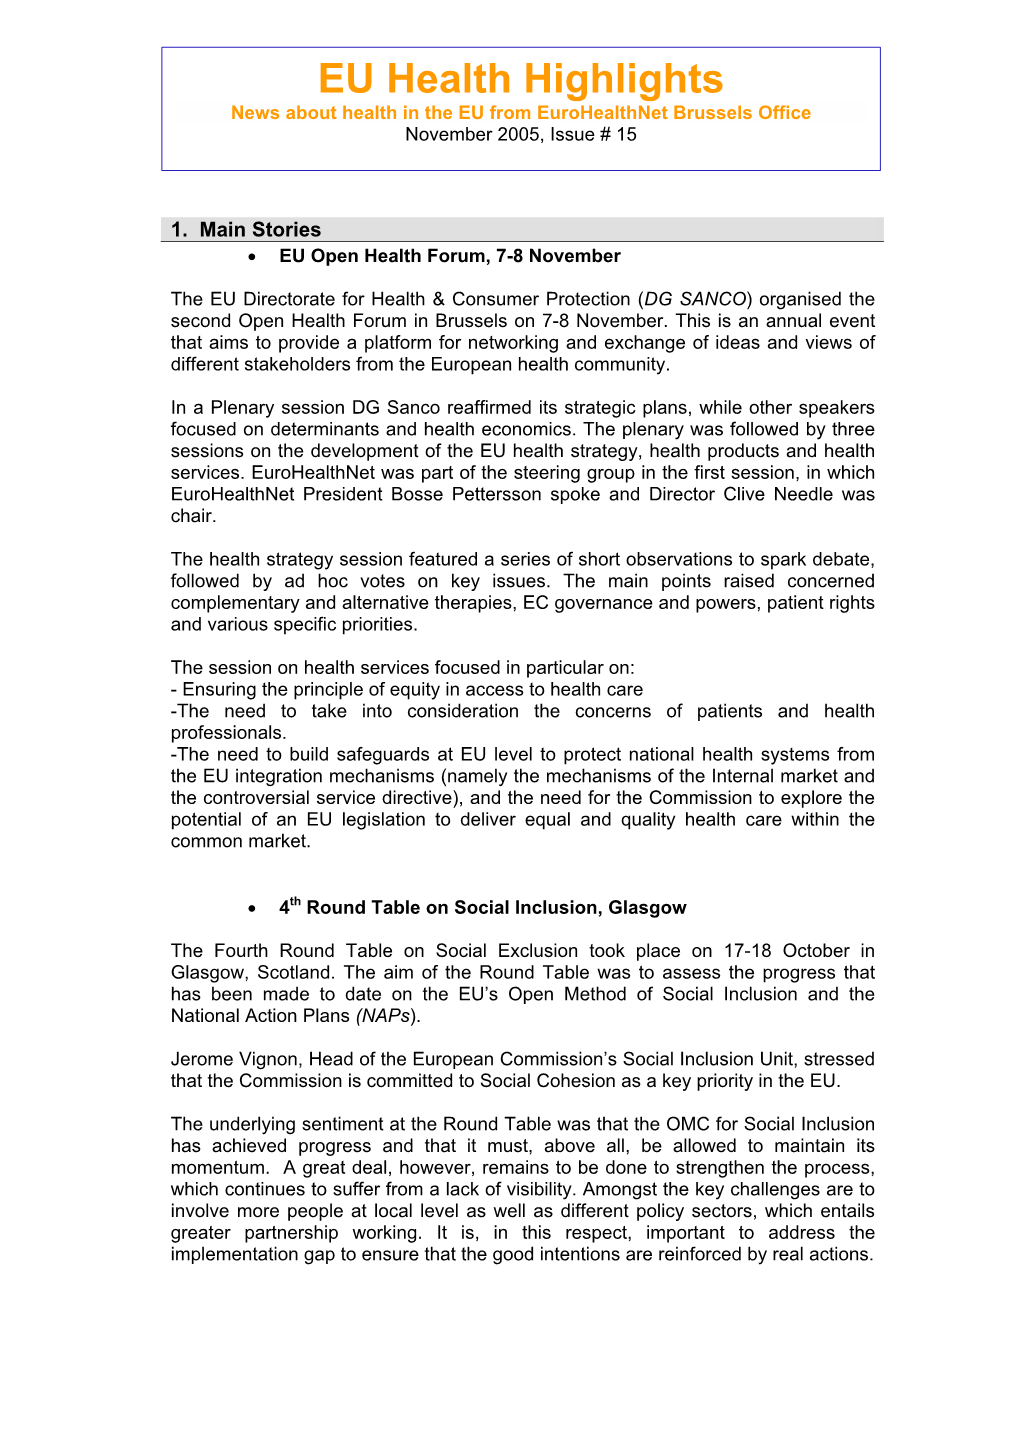 EU Health Highlights News About Health in the EU from Eurohealthnet Brussels Office November 2005, Issue # 15